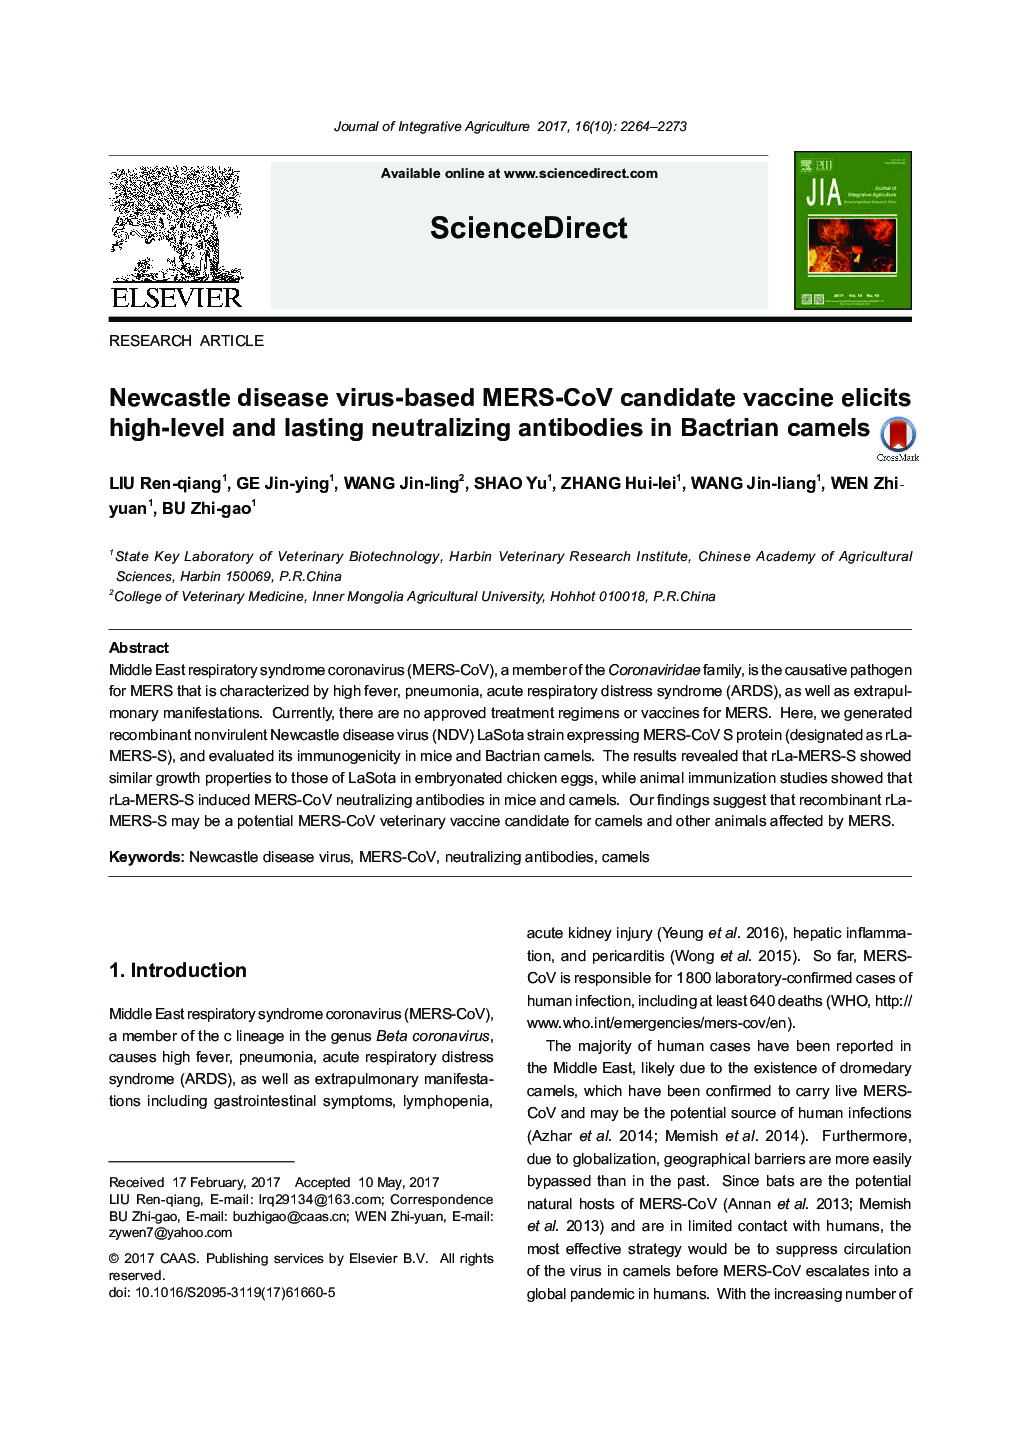 Newcastle disease virus-based MERS-CoV candidate vaccine elicits high-level and lasting neutralizing antibodies in Bactrian camels